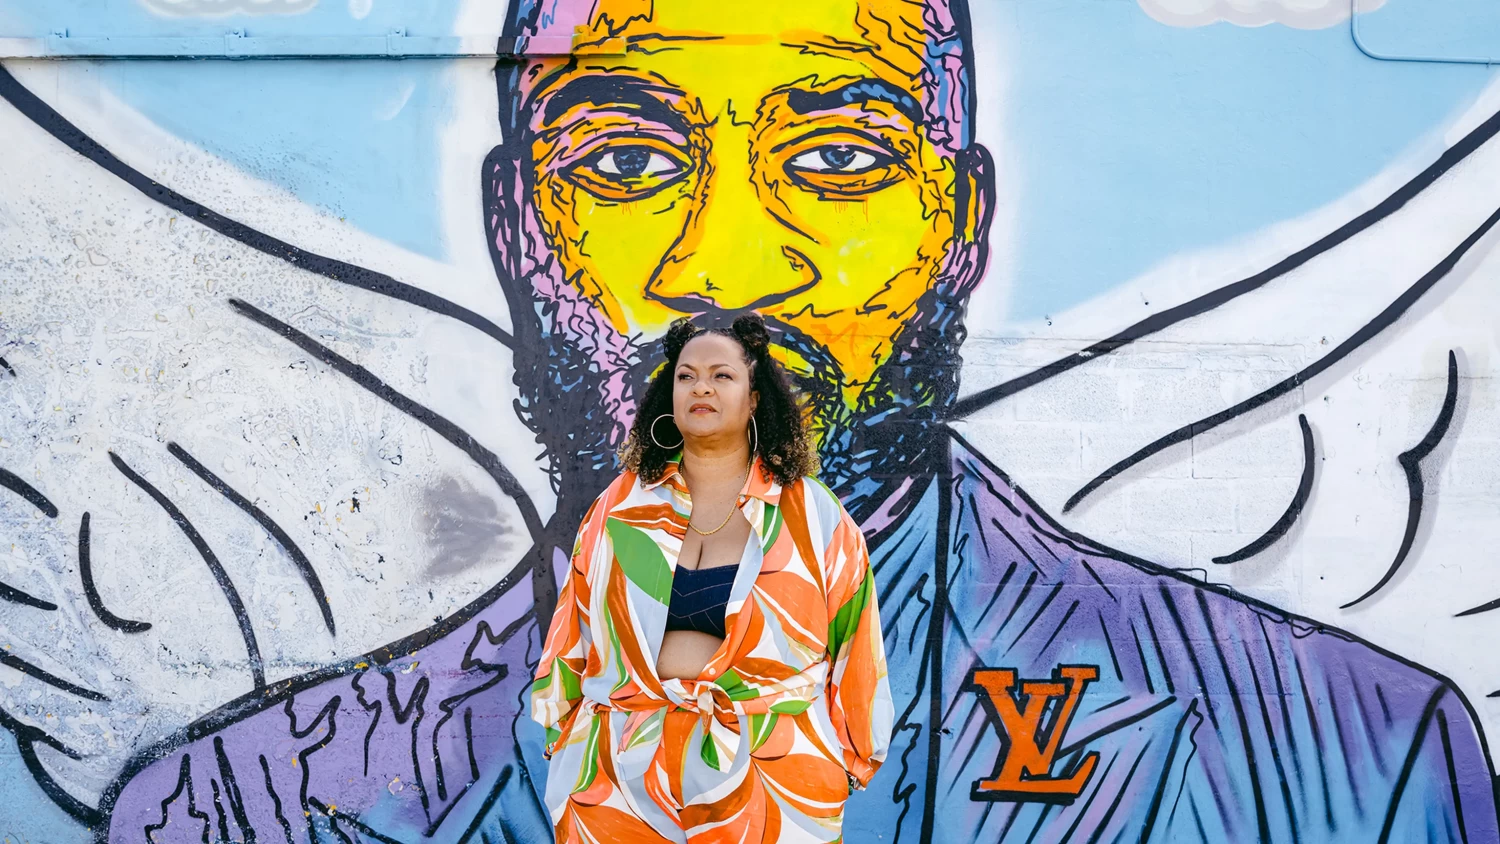 After a vacation to Florida, Abigail Dillon moved her family to Miami. Dillon, pictured in the city’s Wynwood arts district, is one of hundreds of thousands of people who became Floridians since 2020. Melody Timothee for Vox